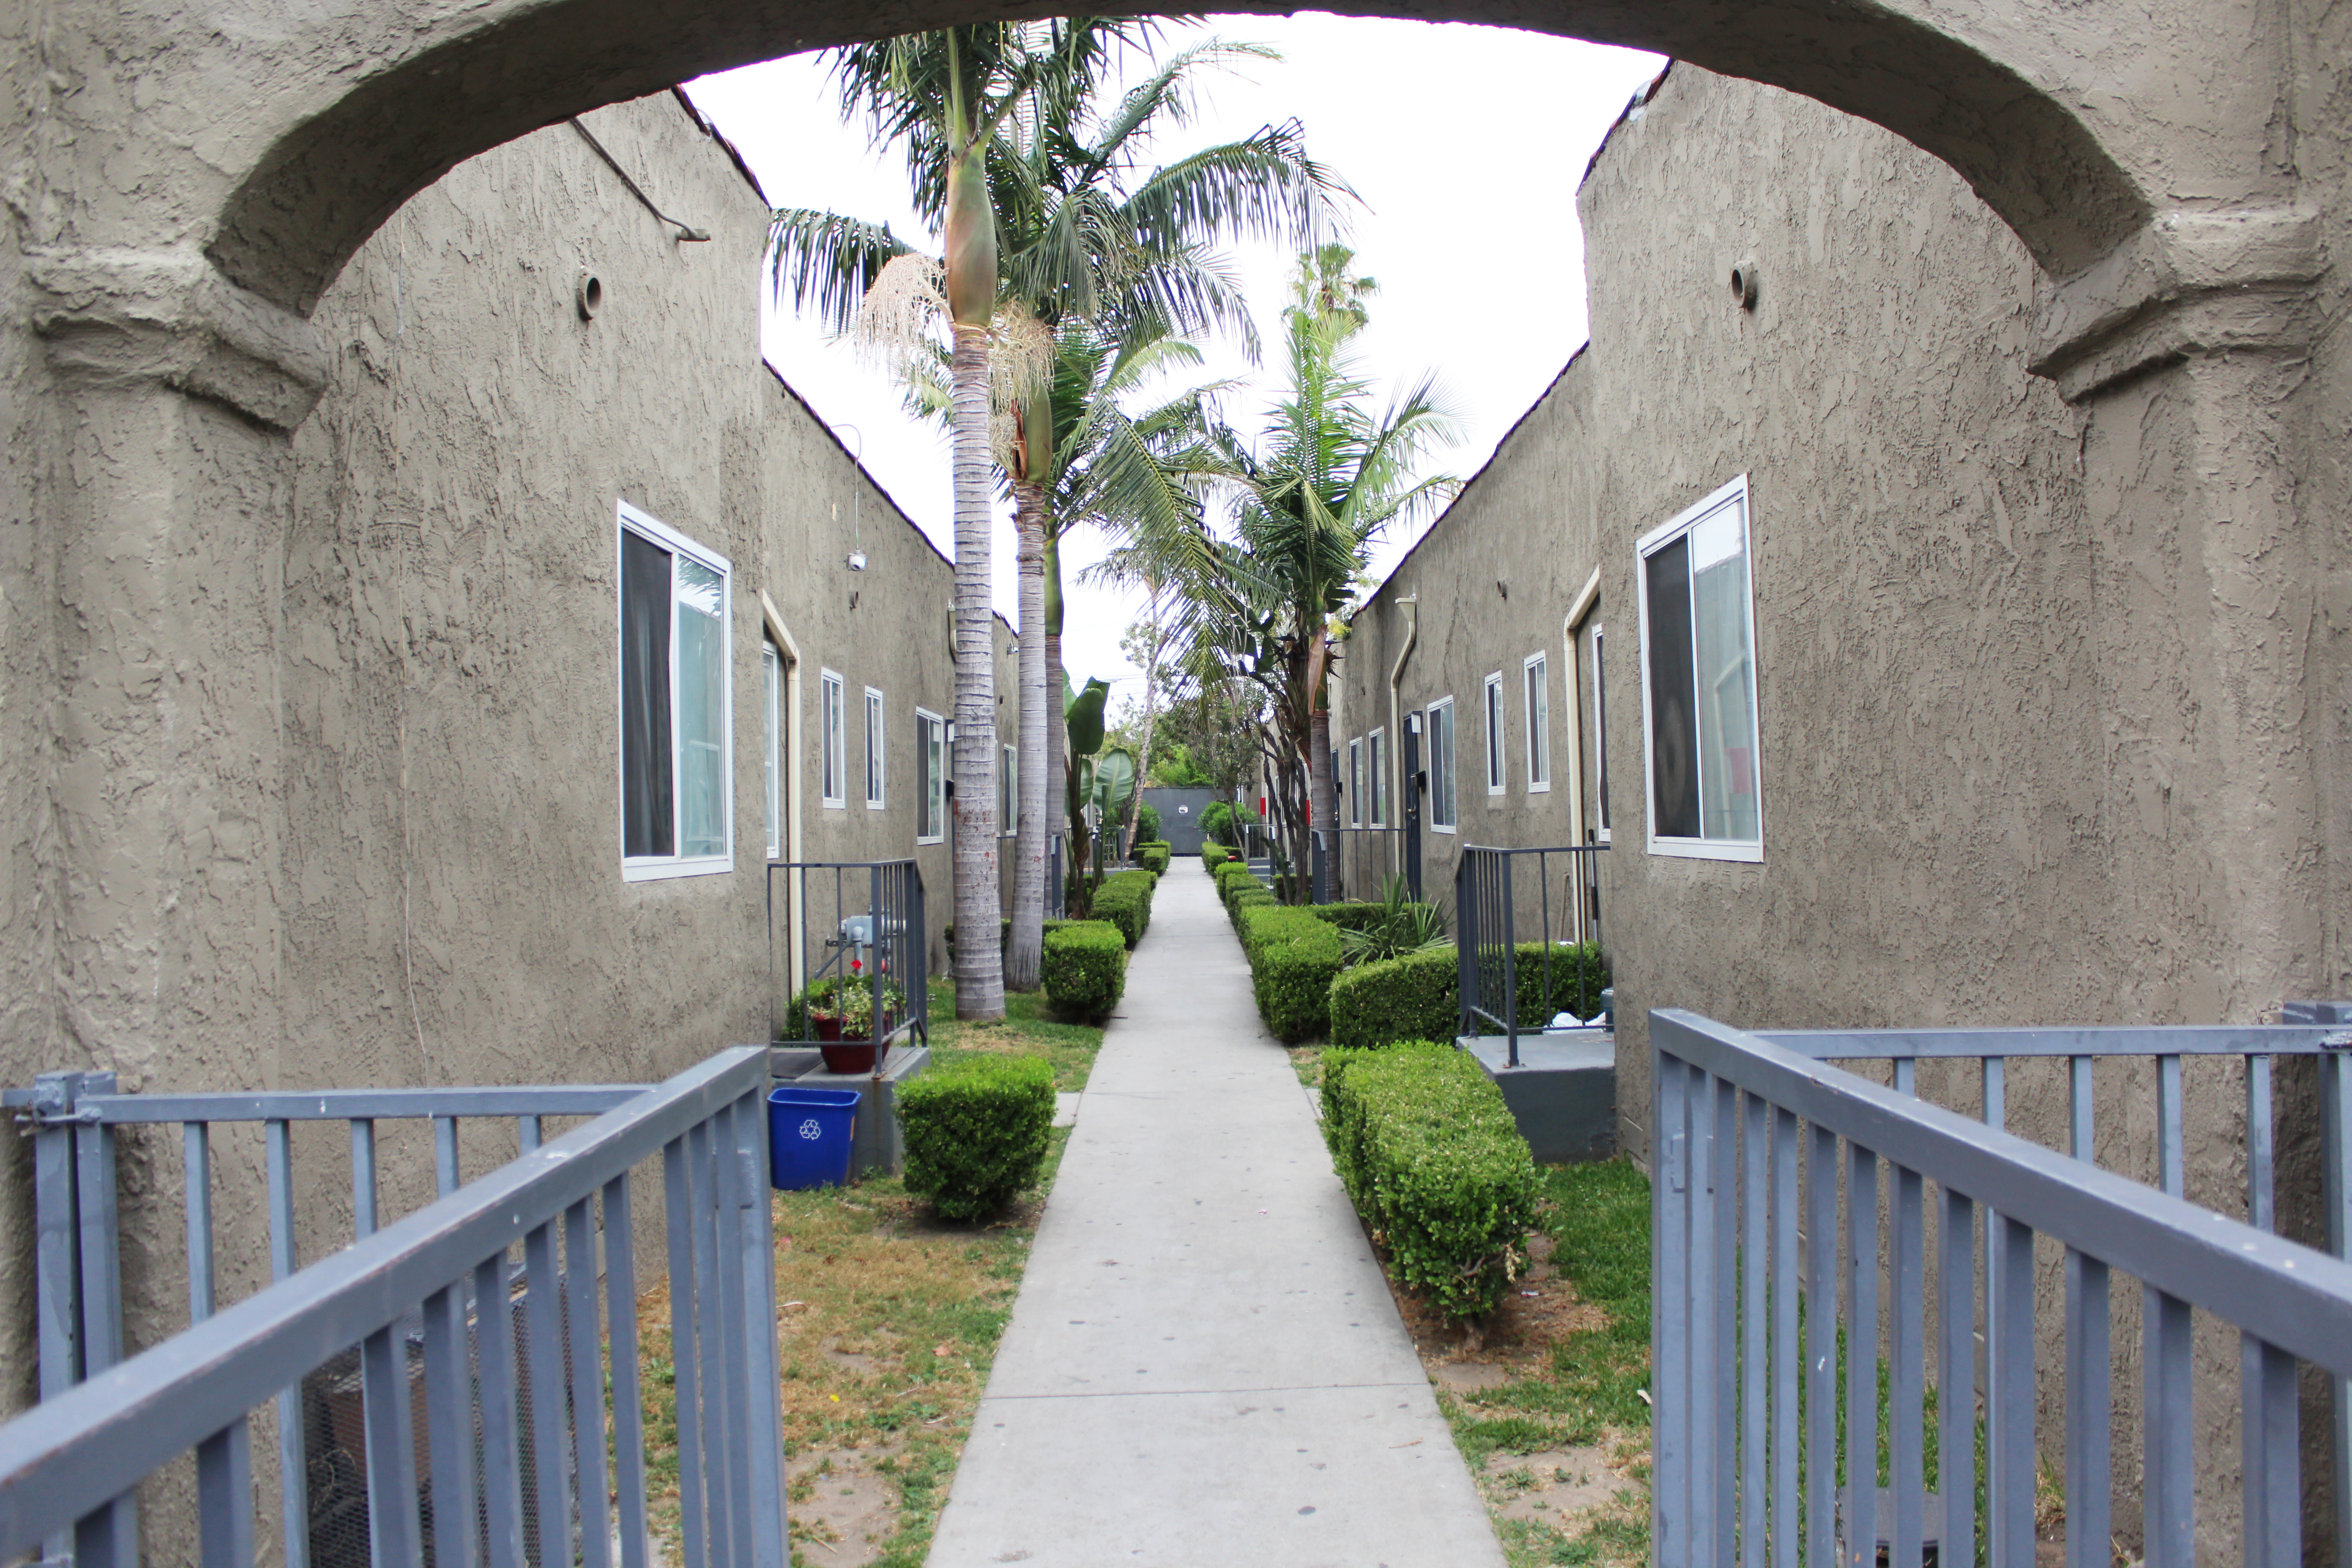 Exterior view of a pathway between units with grass, bushes and trees along the path.